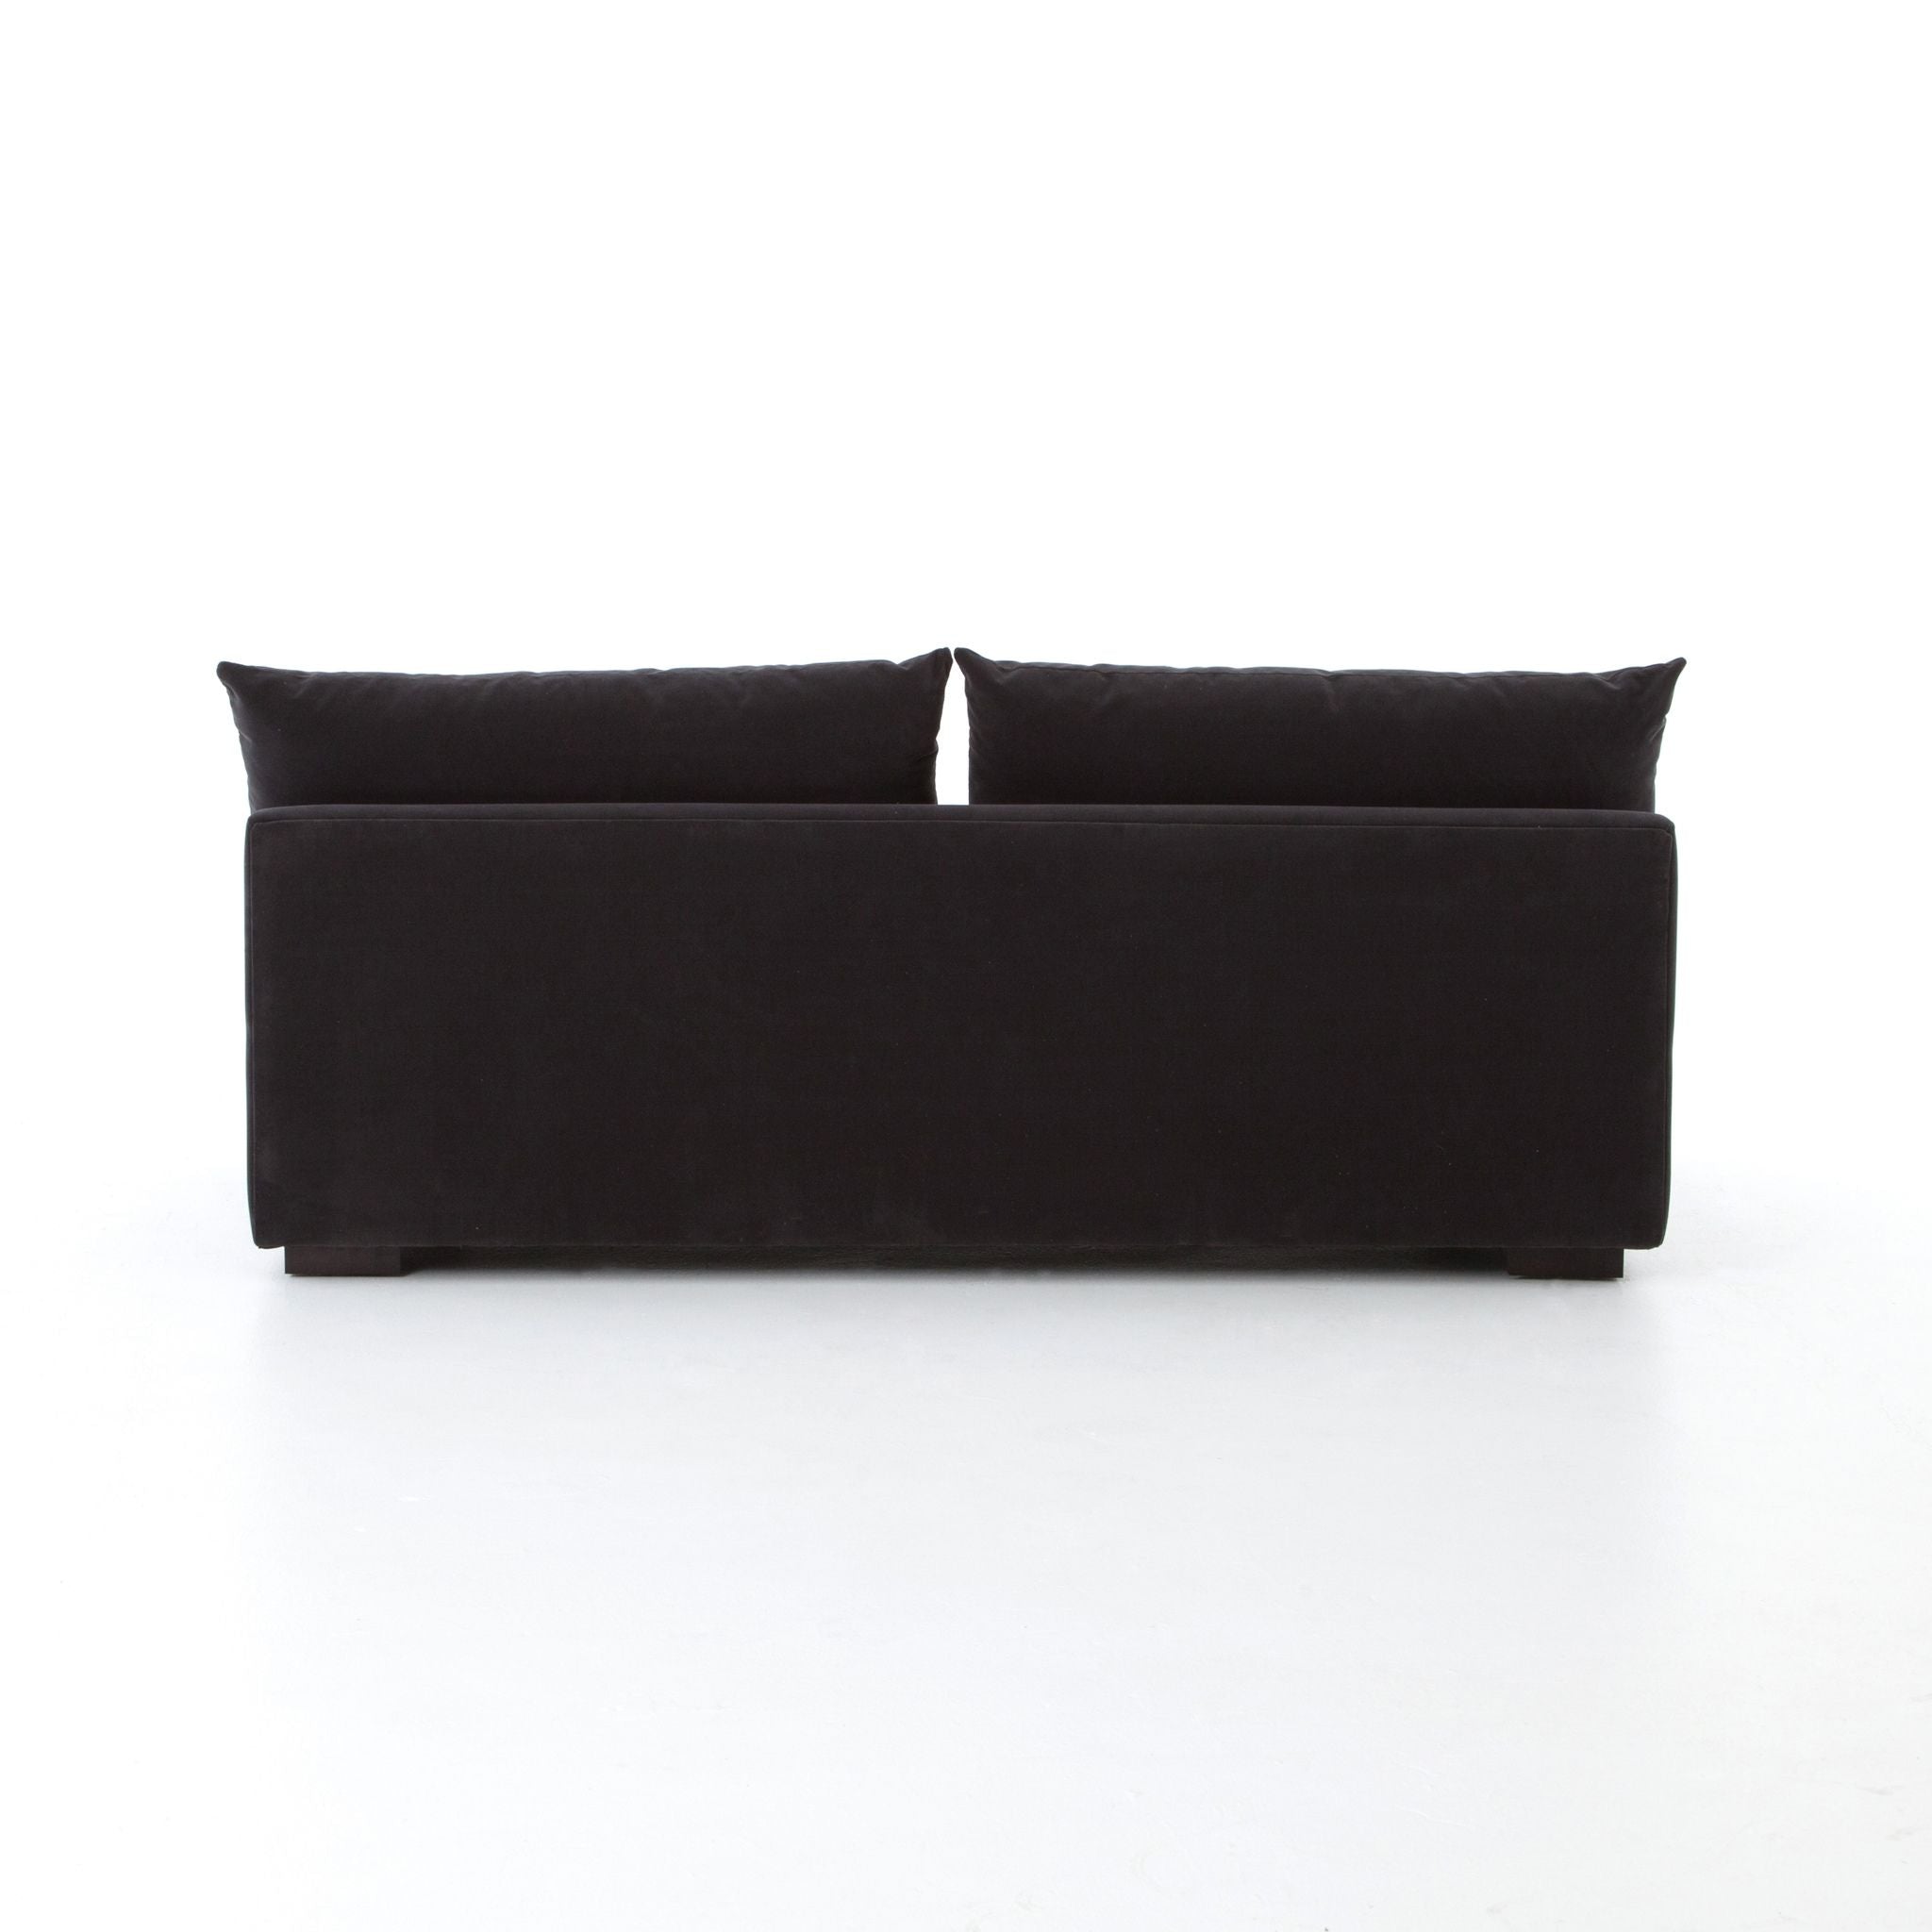 GRANT SECTIONAL - ARMLESS PIECE